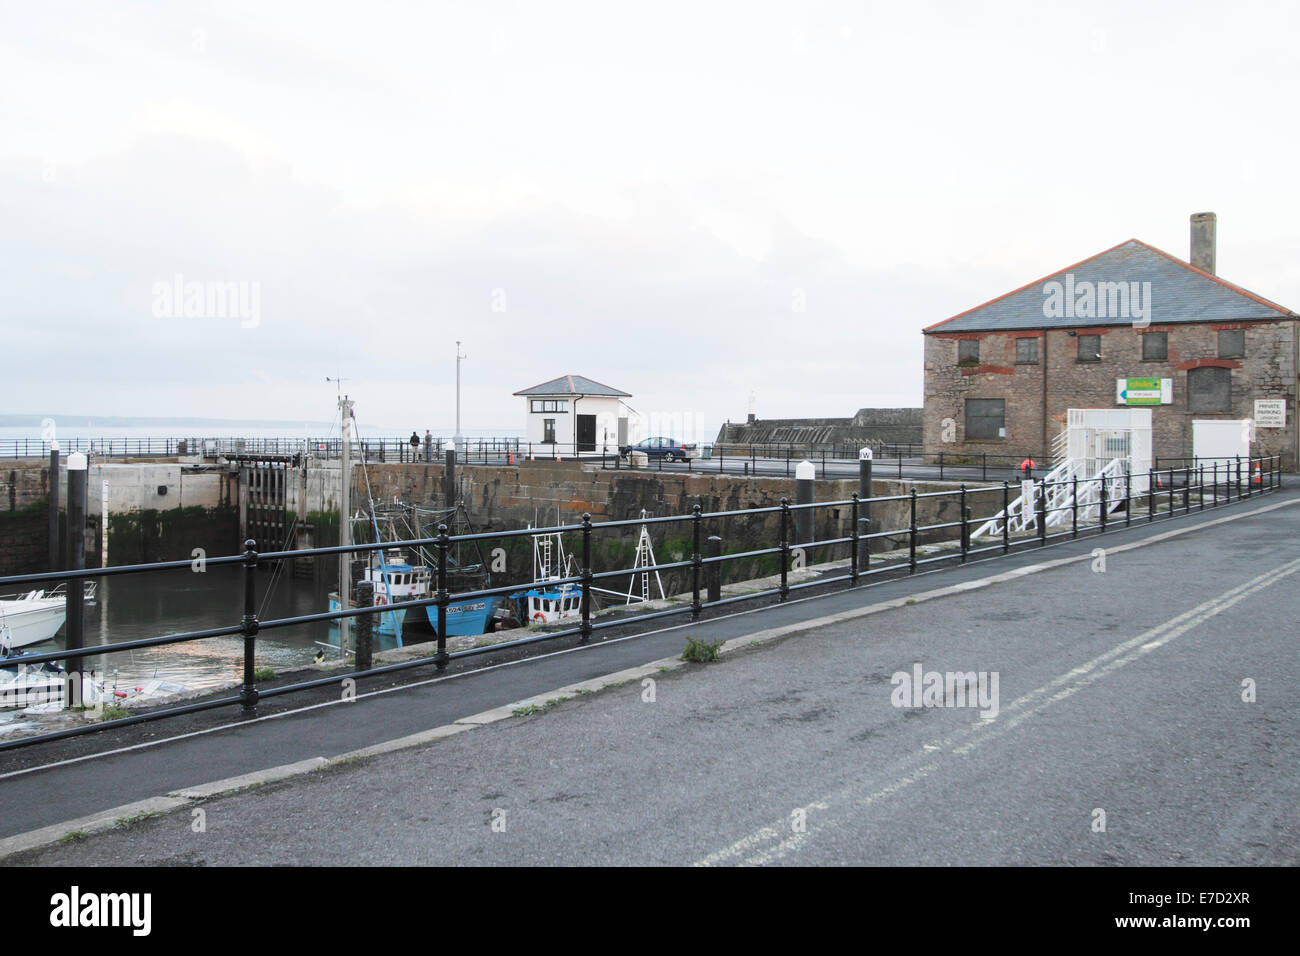 Porthcawl Marina - Jennings building on the right - oldest warehouse building from the original Porthcawl harbour Stock Photo